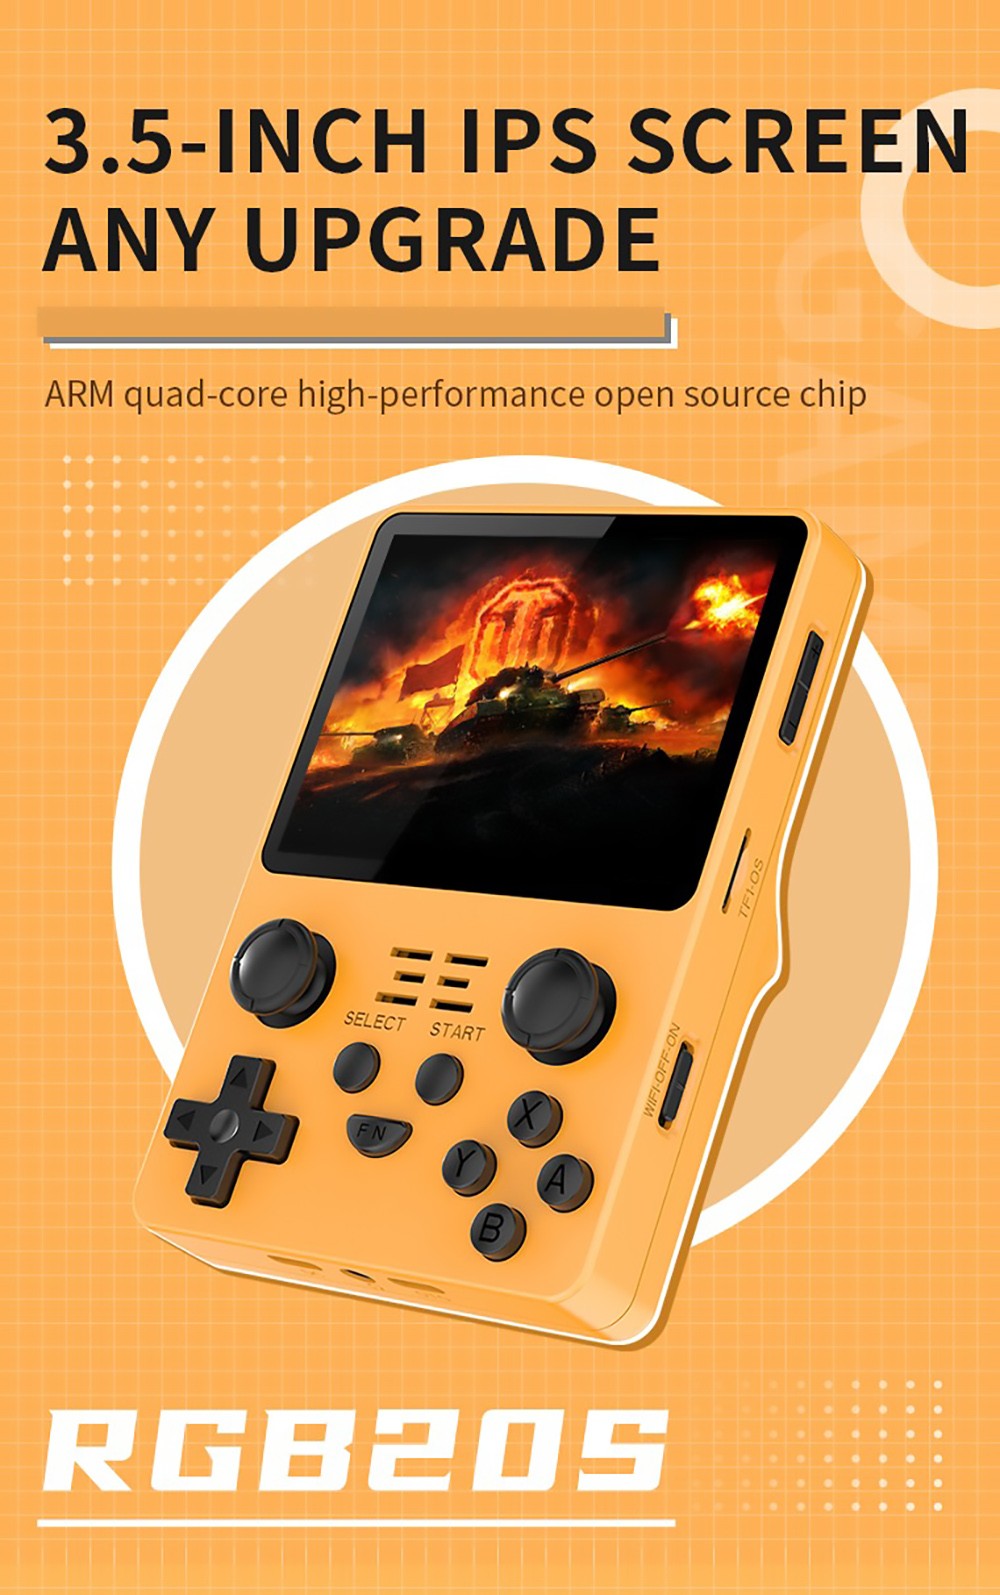 Powkiddy RGB20S Handheld Game Console 16+128GB 20,000 Games 3.5'' IPS OCA Screen Open Source for Linux - White